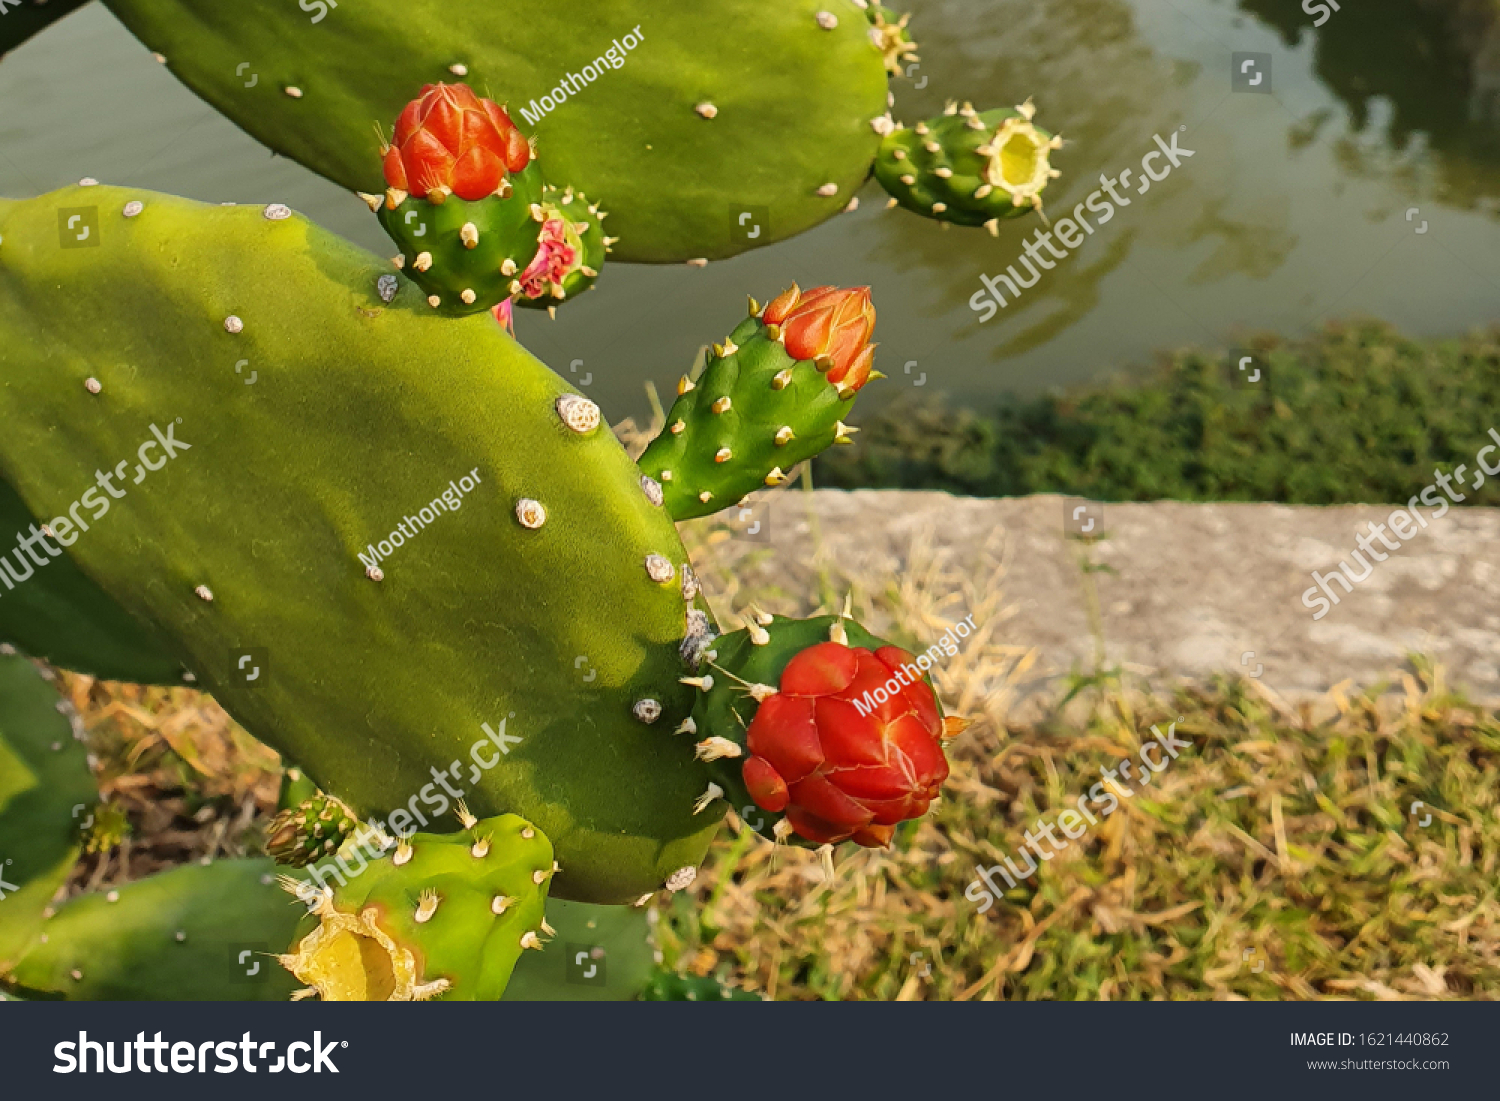 A blooming red flower blooms from the edge of a sheet of prickly pear cactus. #1621440862